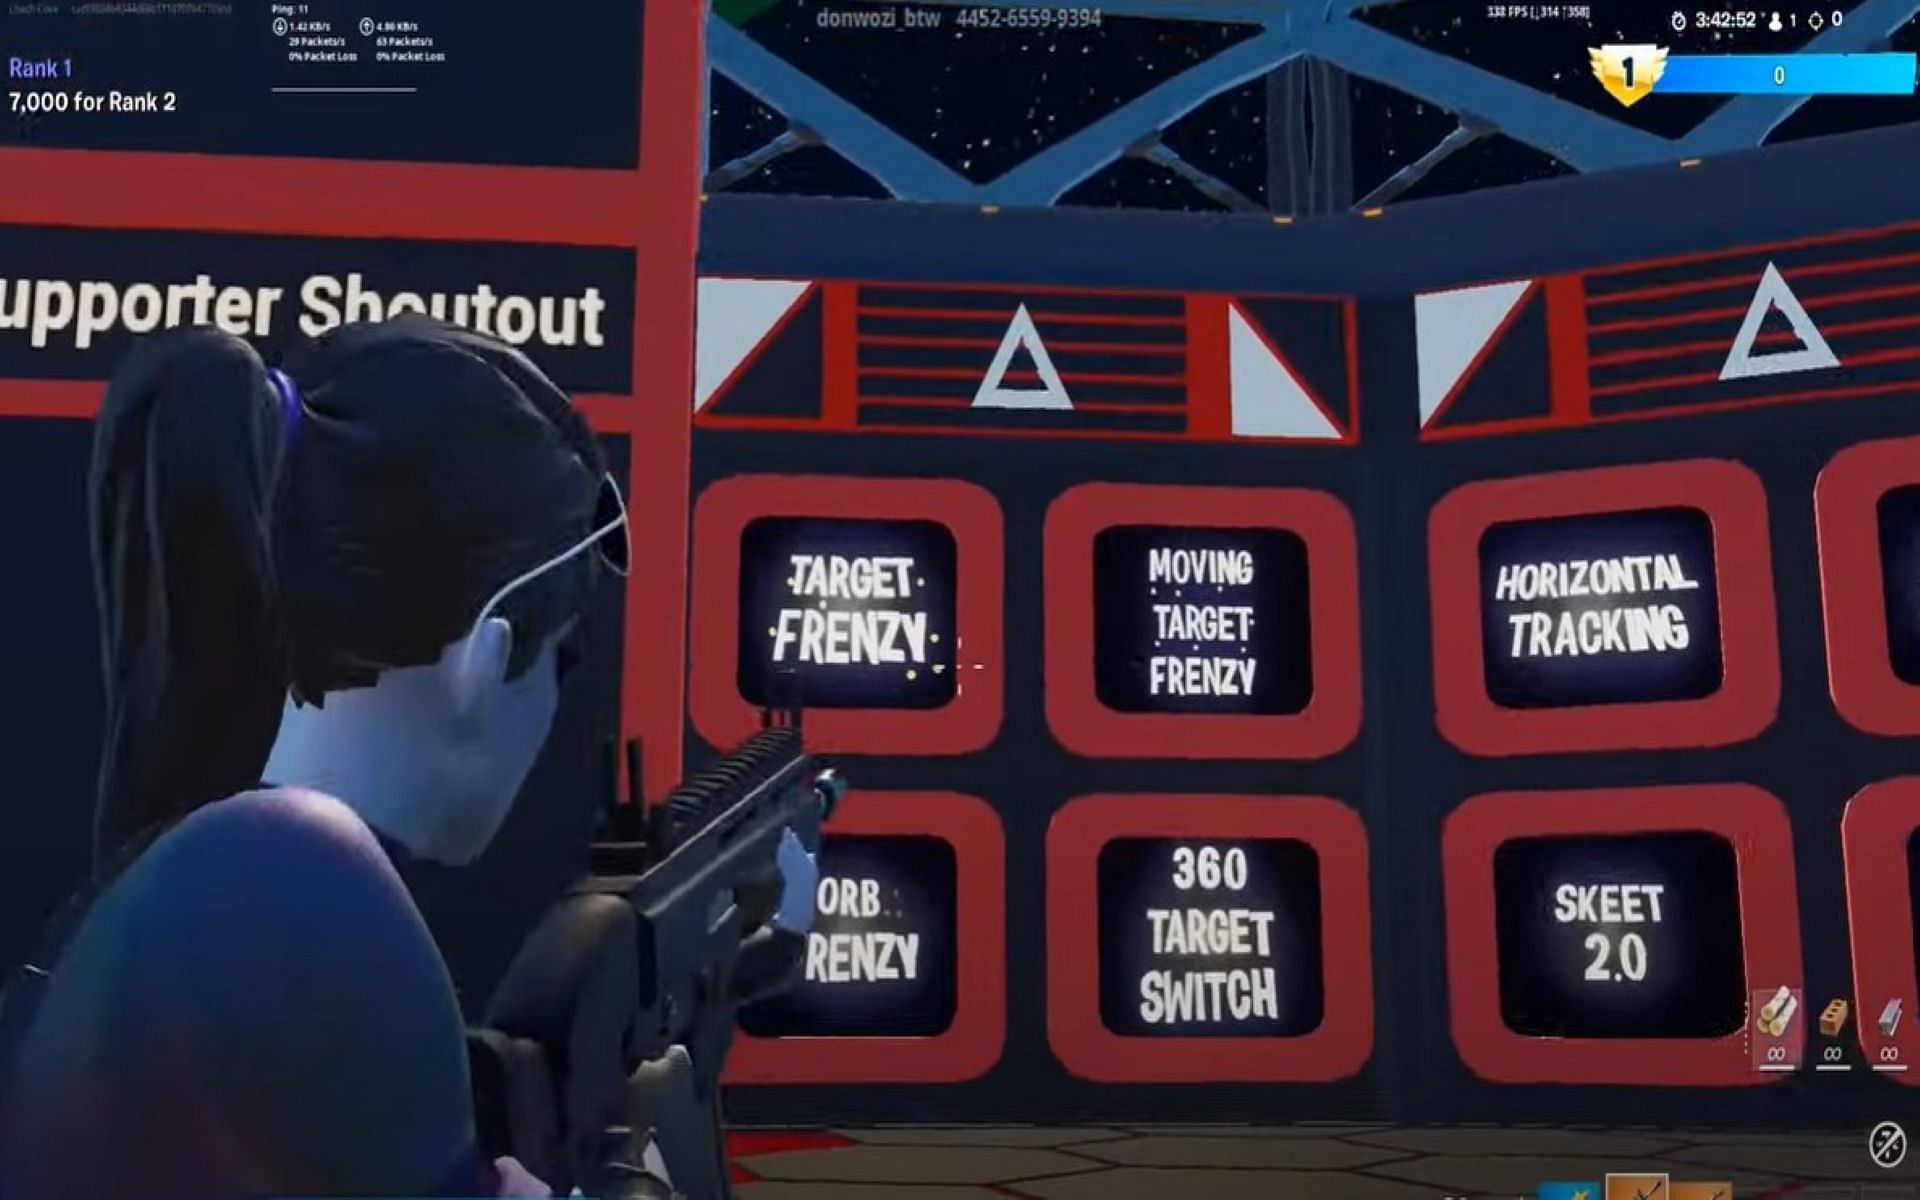 Aim training maps in Fortnite help players get better with weapons (Image via Donwozi/YouTube)